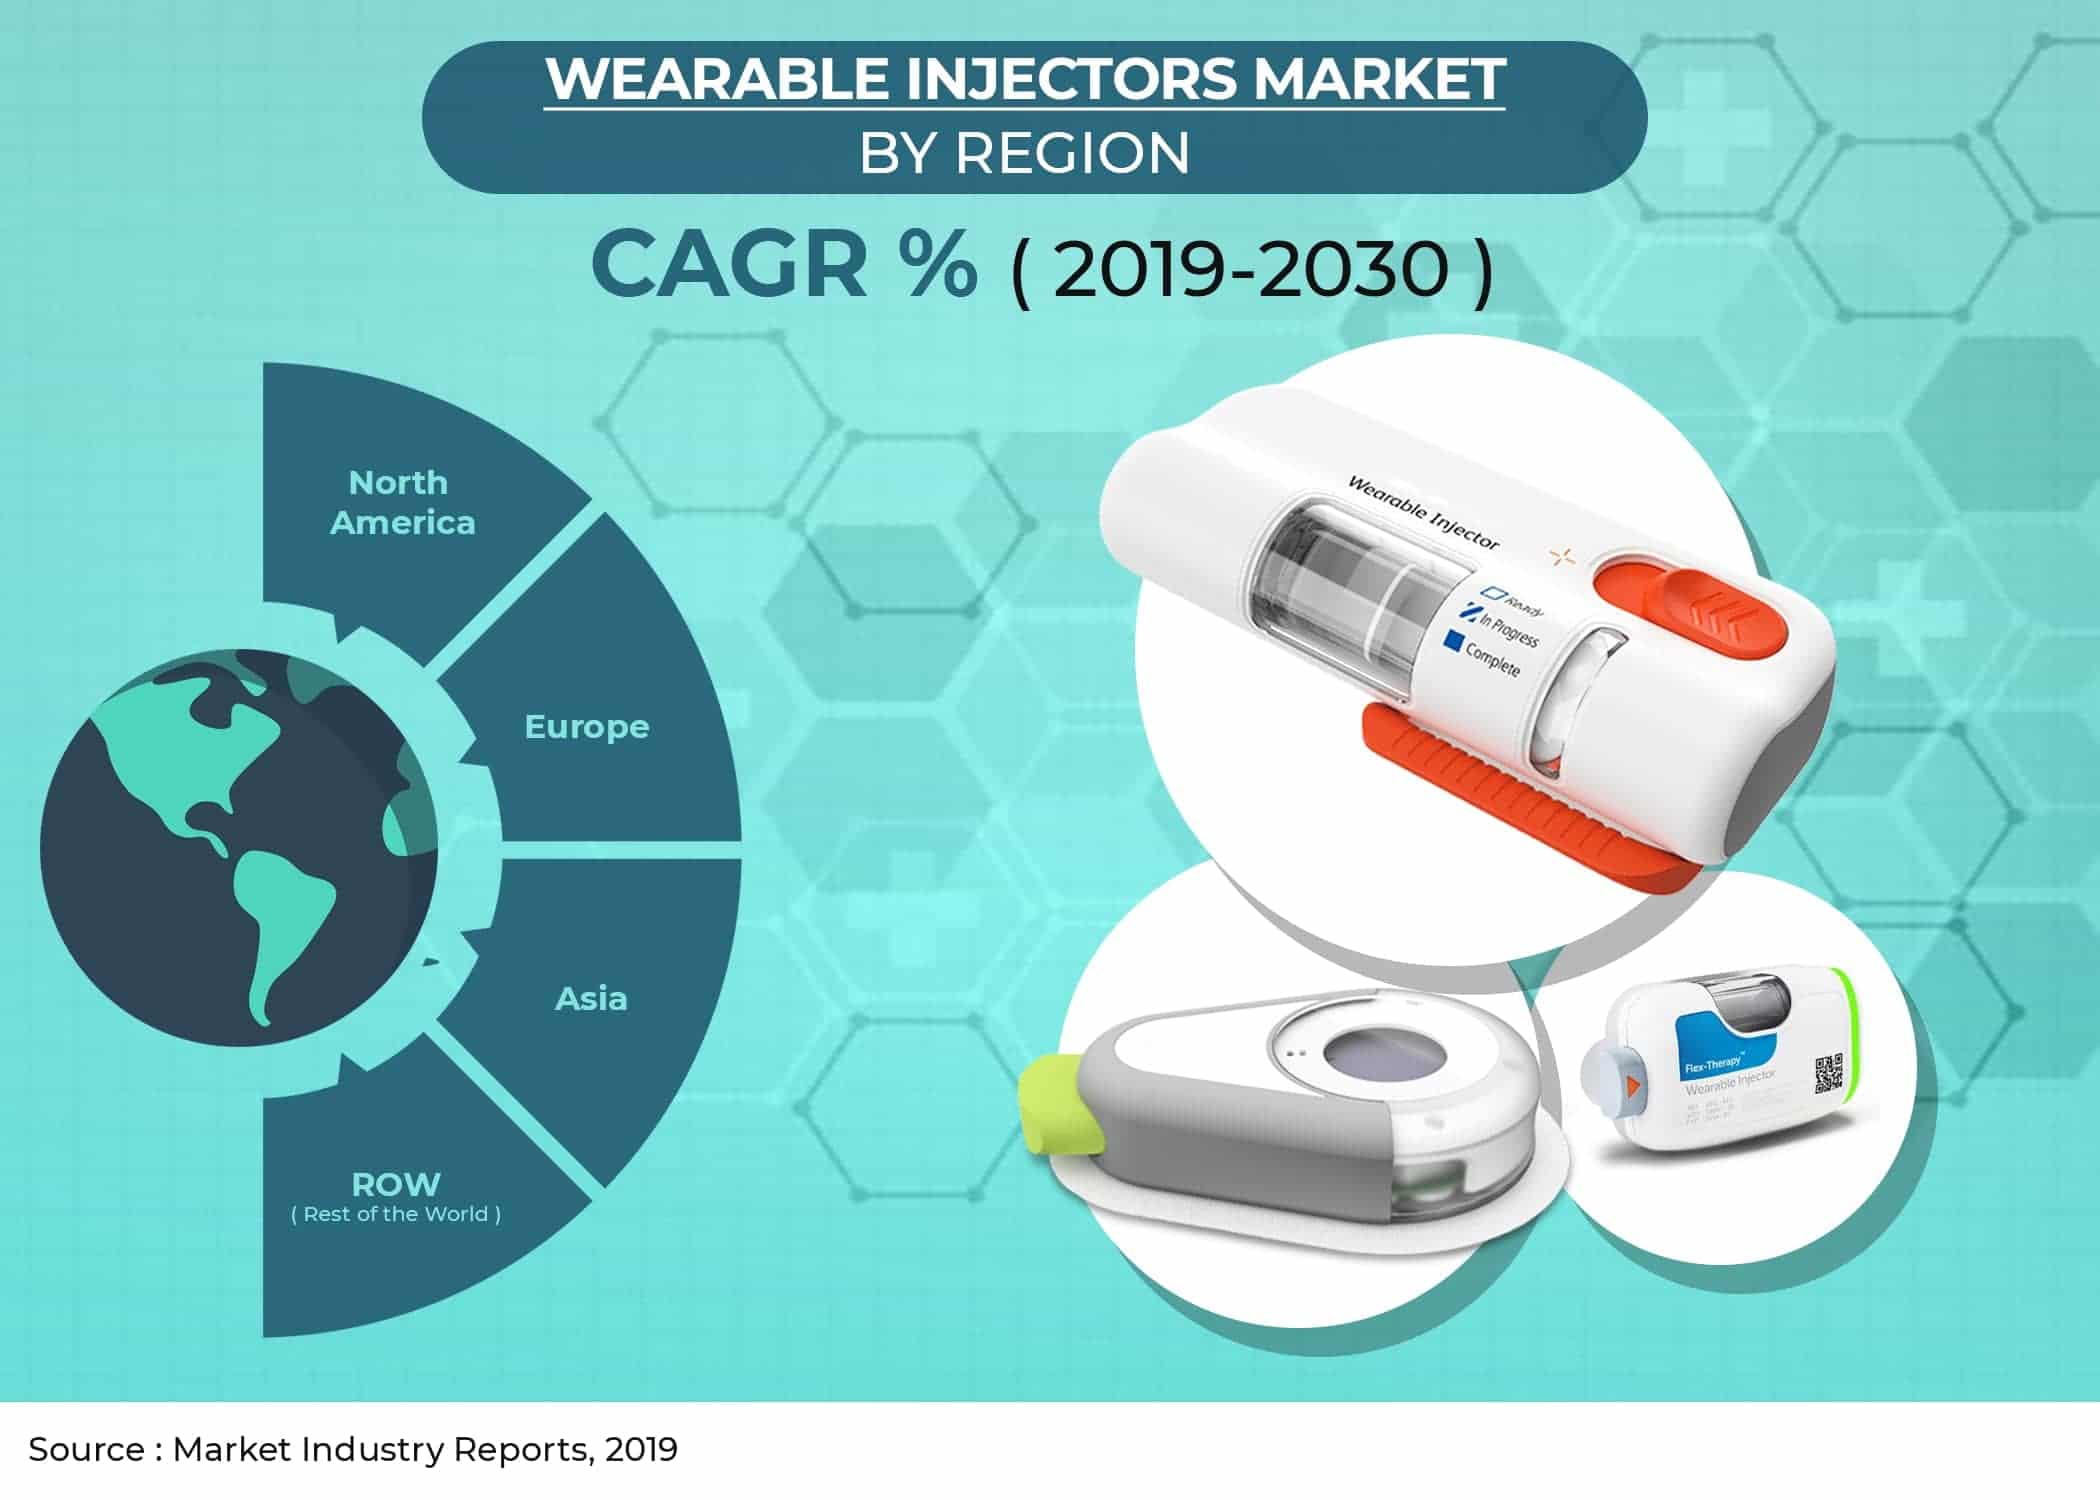 Wearable Injectors Market Size, Share, Trend, by Type, Application,End Users Region-Global Analysis & Forecast 2019-2030 | Marketindustryreports